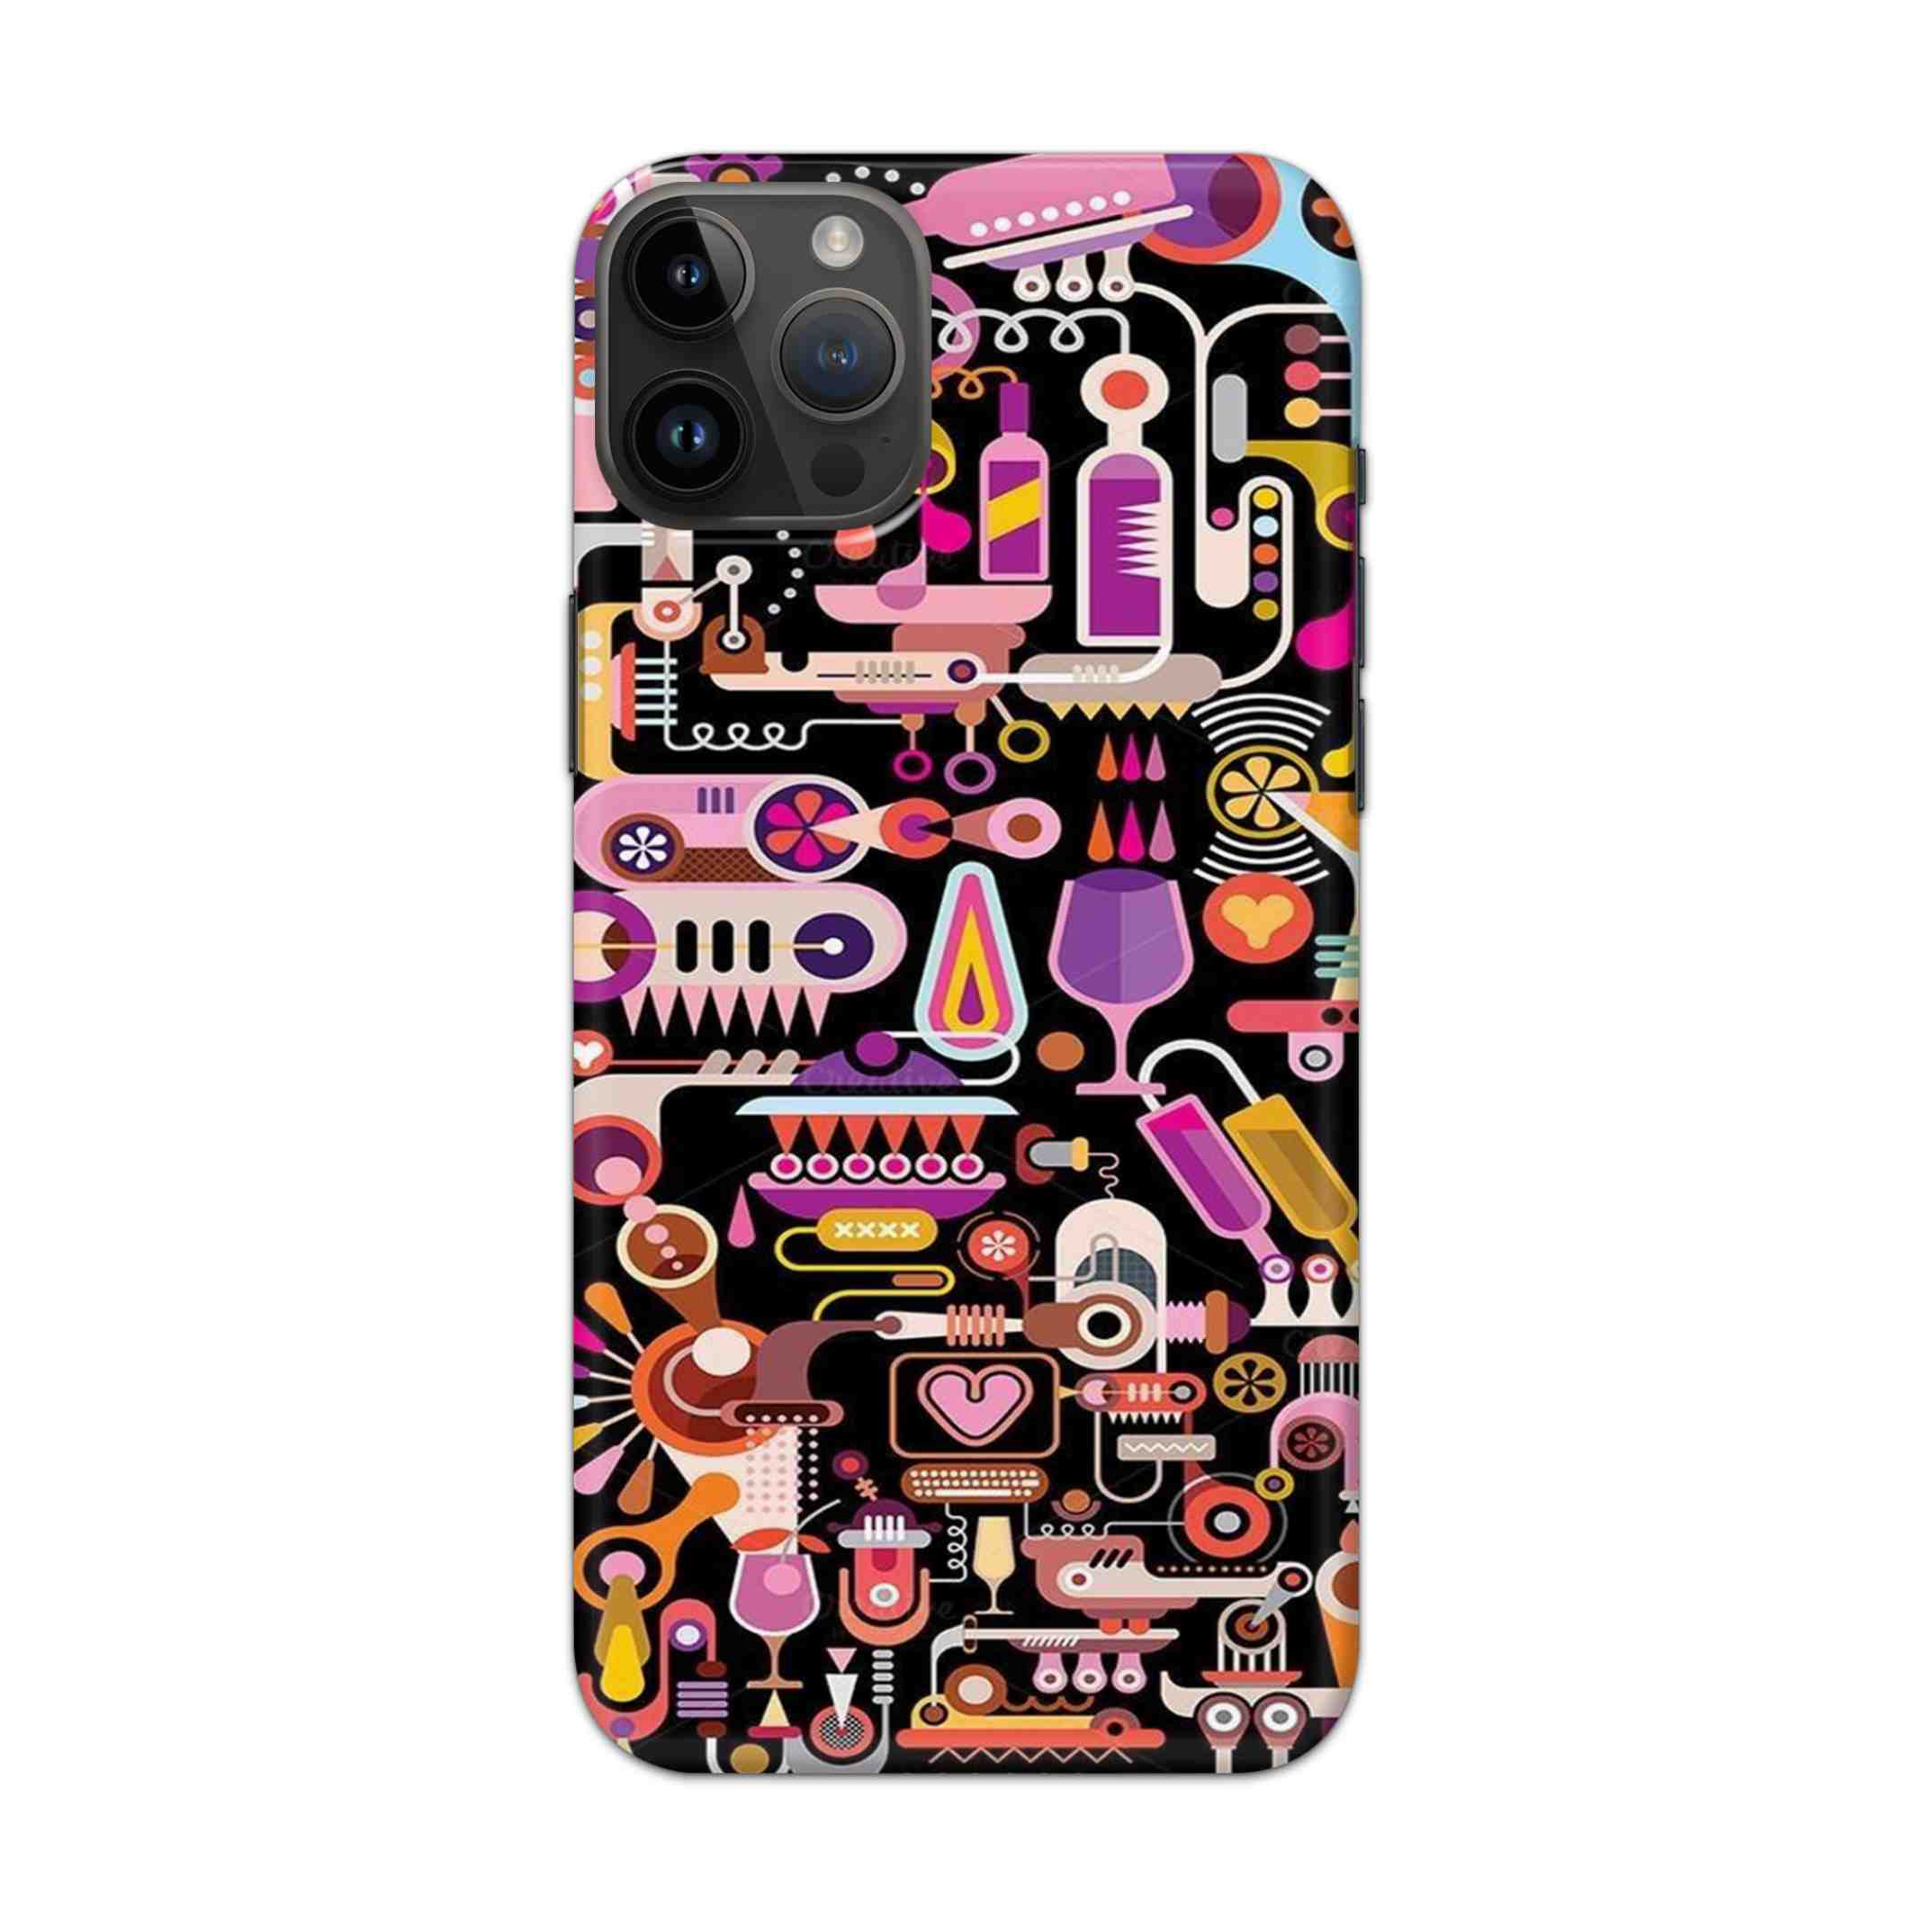 Buy Art Hard Back Mobile Phone Case/Cover For iPhone 14 Pro Max Online